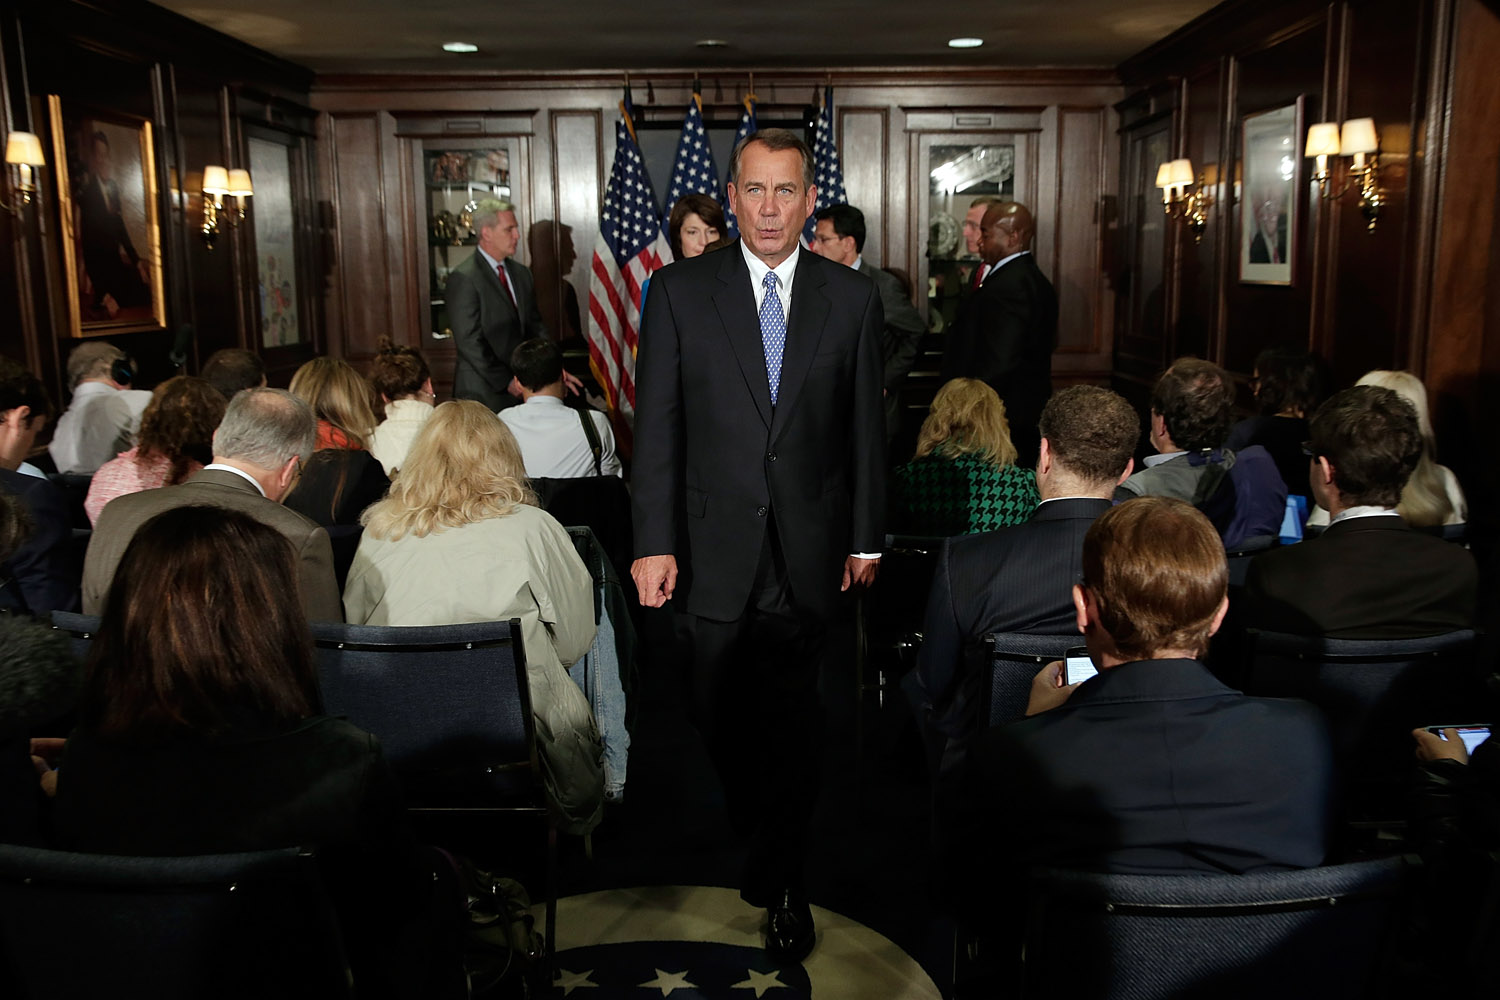 Oct. 23, 2013. U.S. Speaker of the House John Boehner (R-OH) (C) leaves a Republican leadership press conference in Washington.